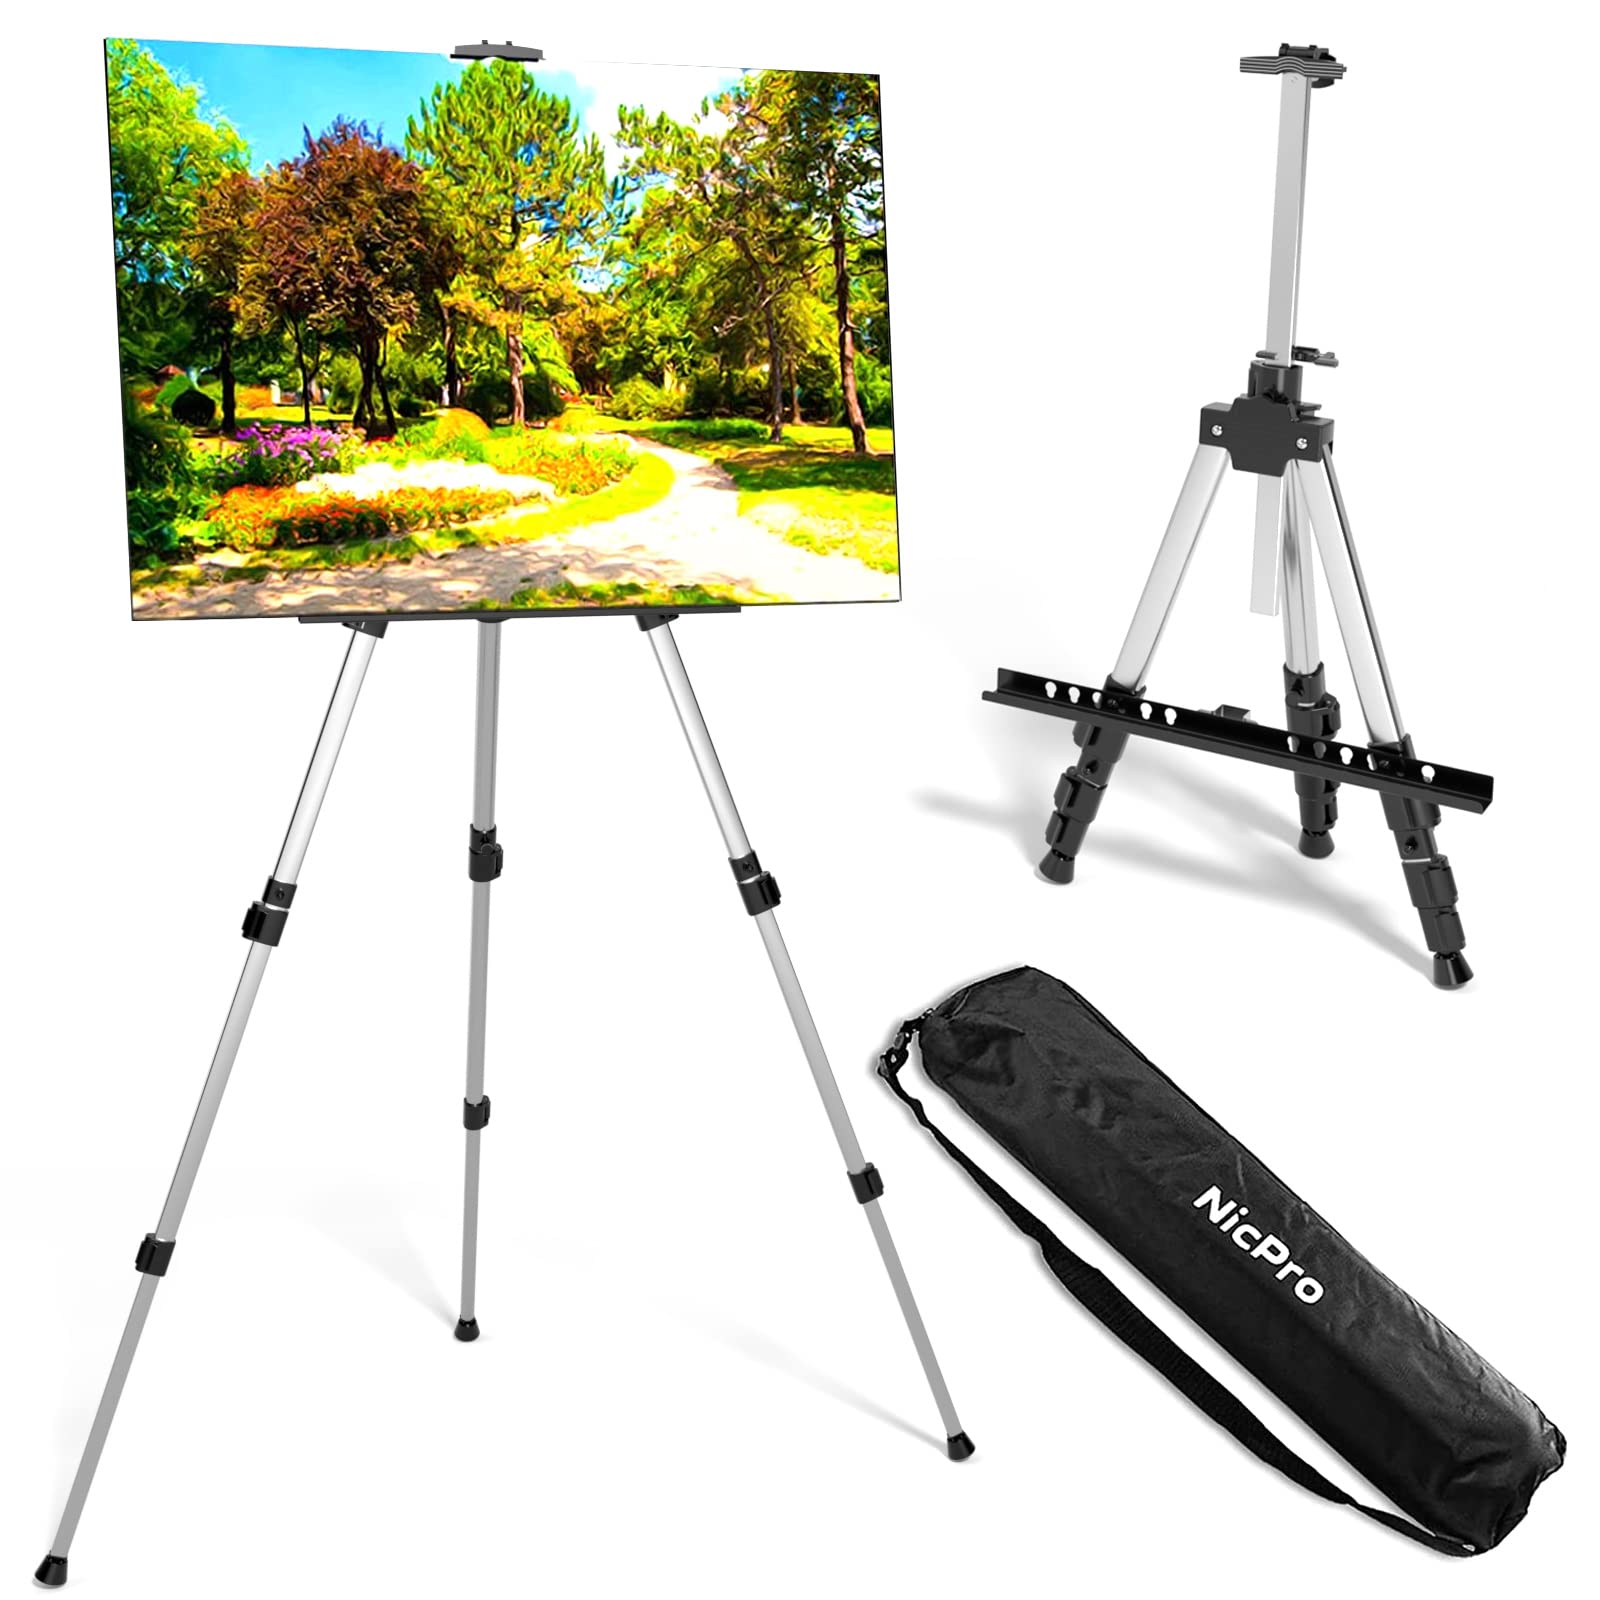 Nicpro Painting Easel for Display, Adjustable Height 17'' to 66'' Tabletop & Floor Art Easel, Aluminum Tripod Artist Easels Stand Canvas, Wedding Signs with Carry Bag - Silver